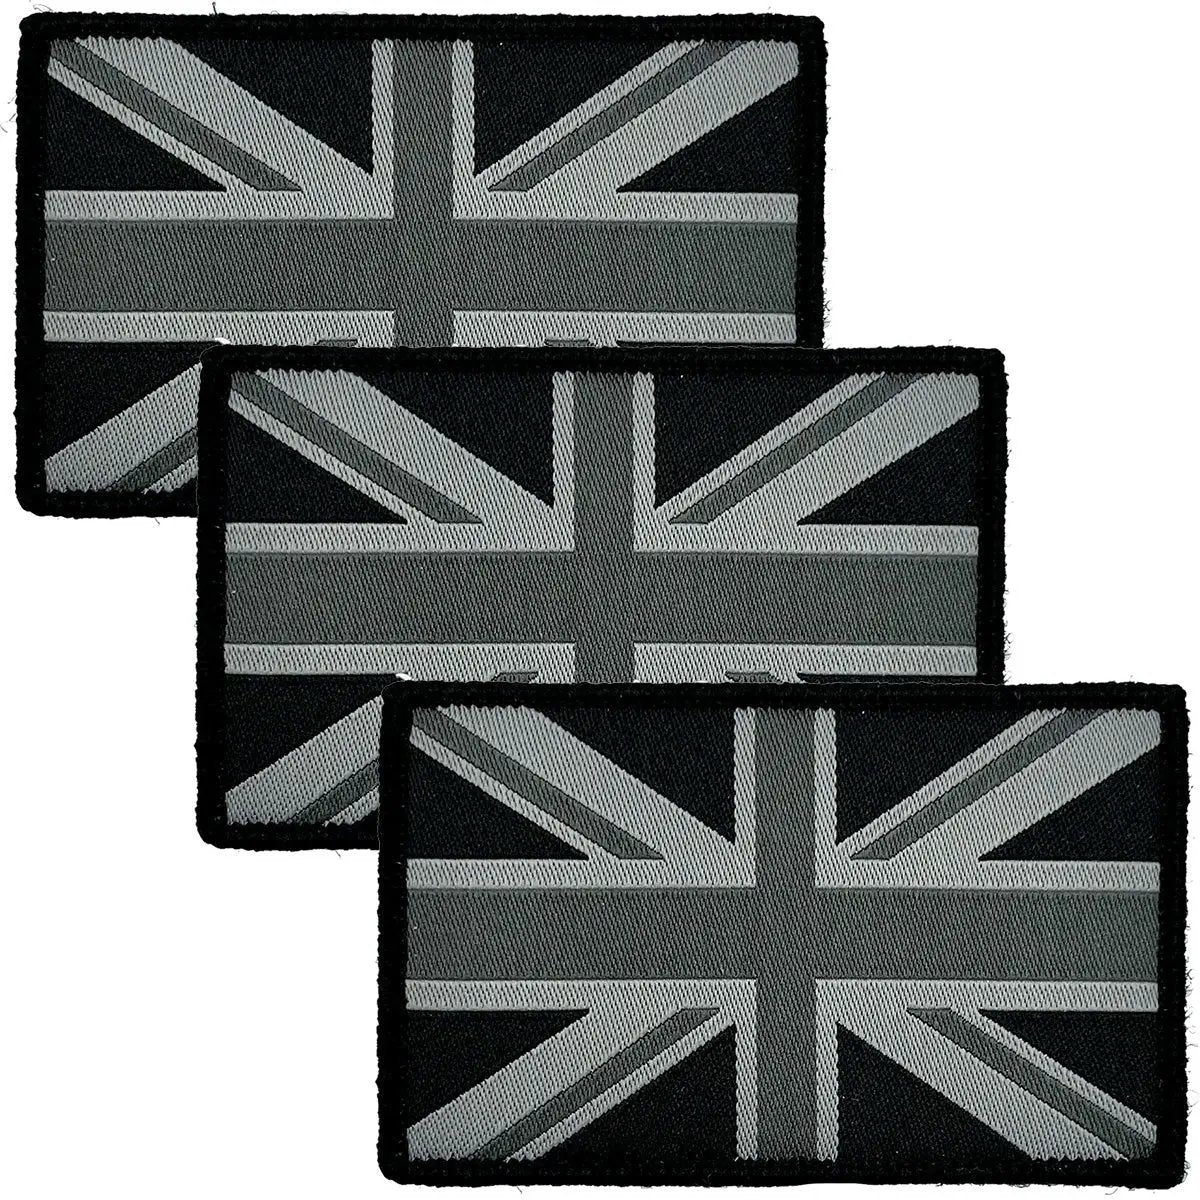 Union Jack Patch with Hook and Loop Backing - John Bull Clothing